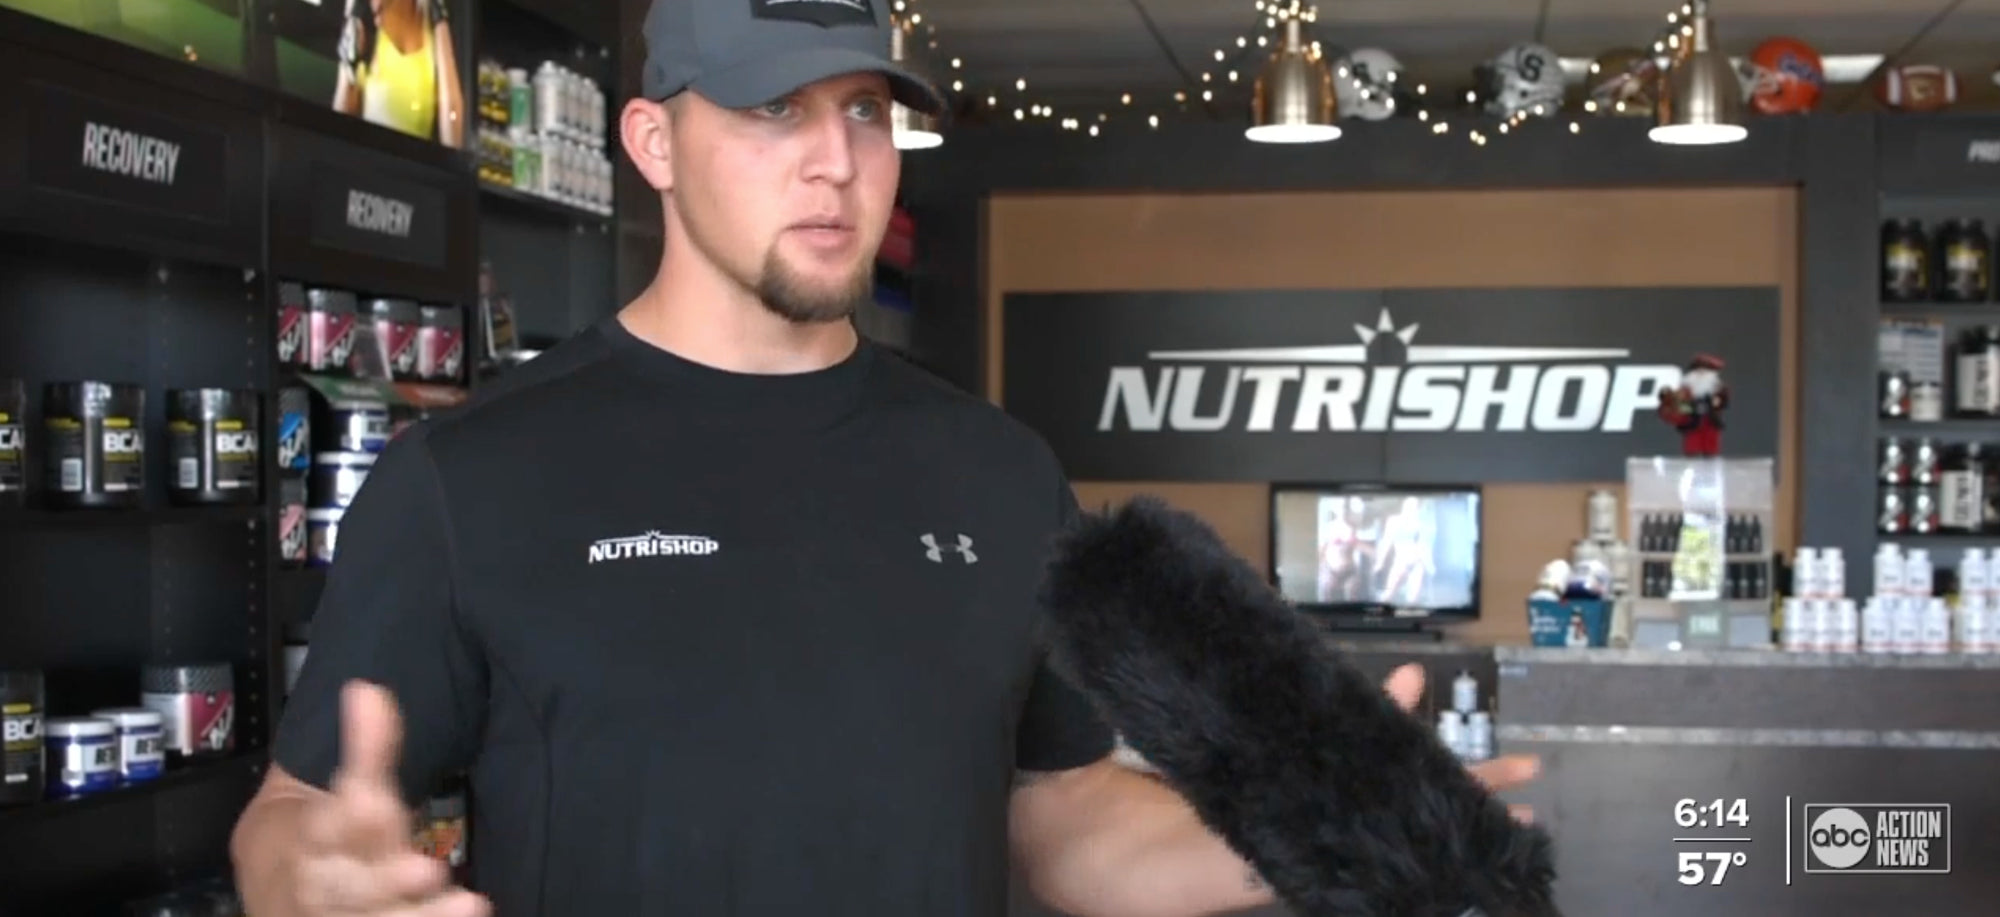 South Tampa NUTRISHOP Franchisee Featured on Local News